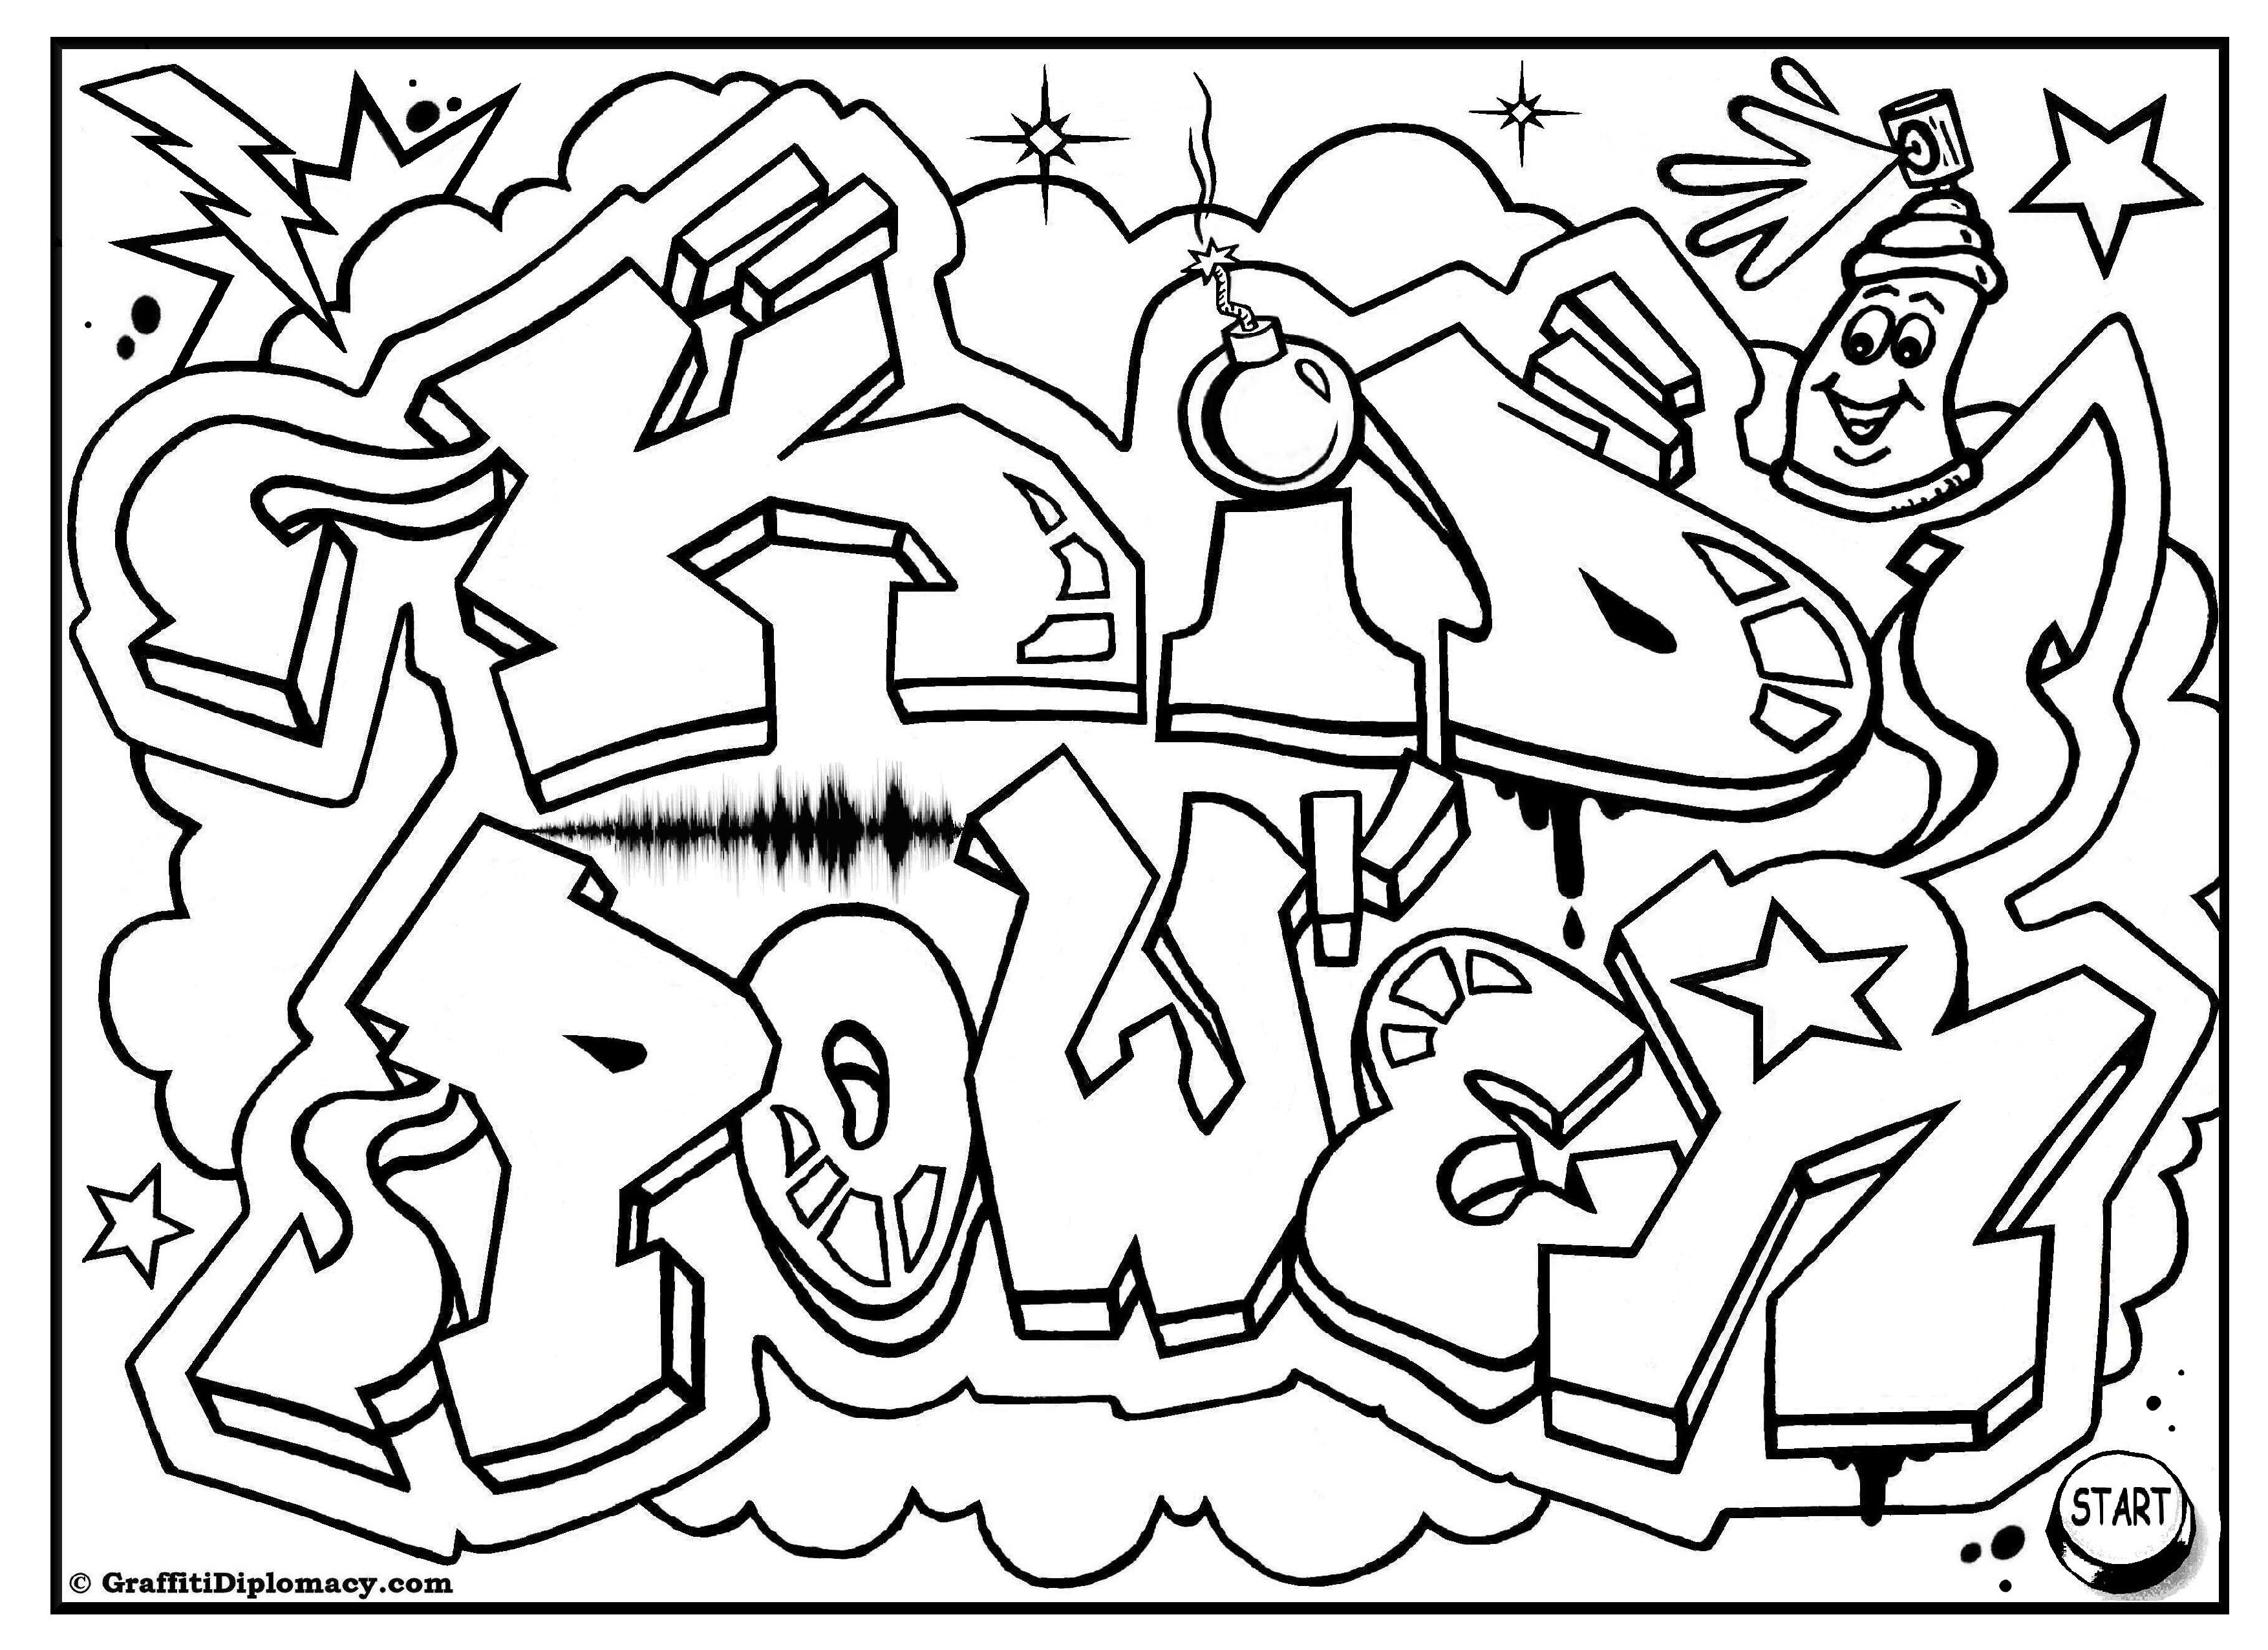 Peace Graffiti, free printable coloring page | Free Coloring Pages ...